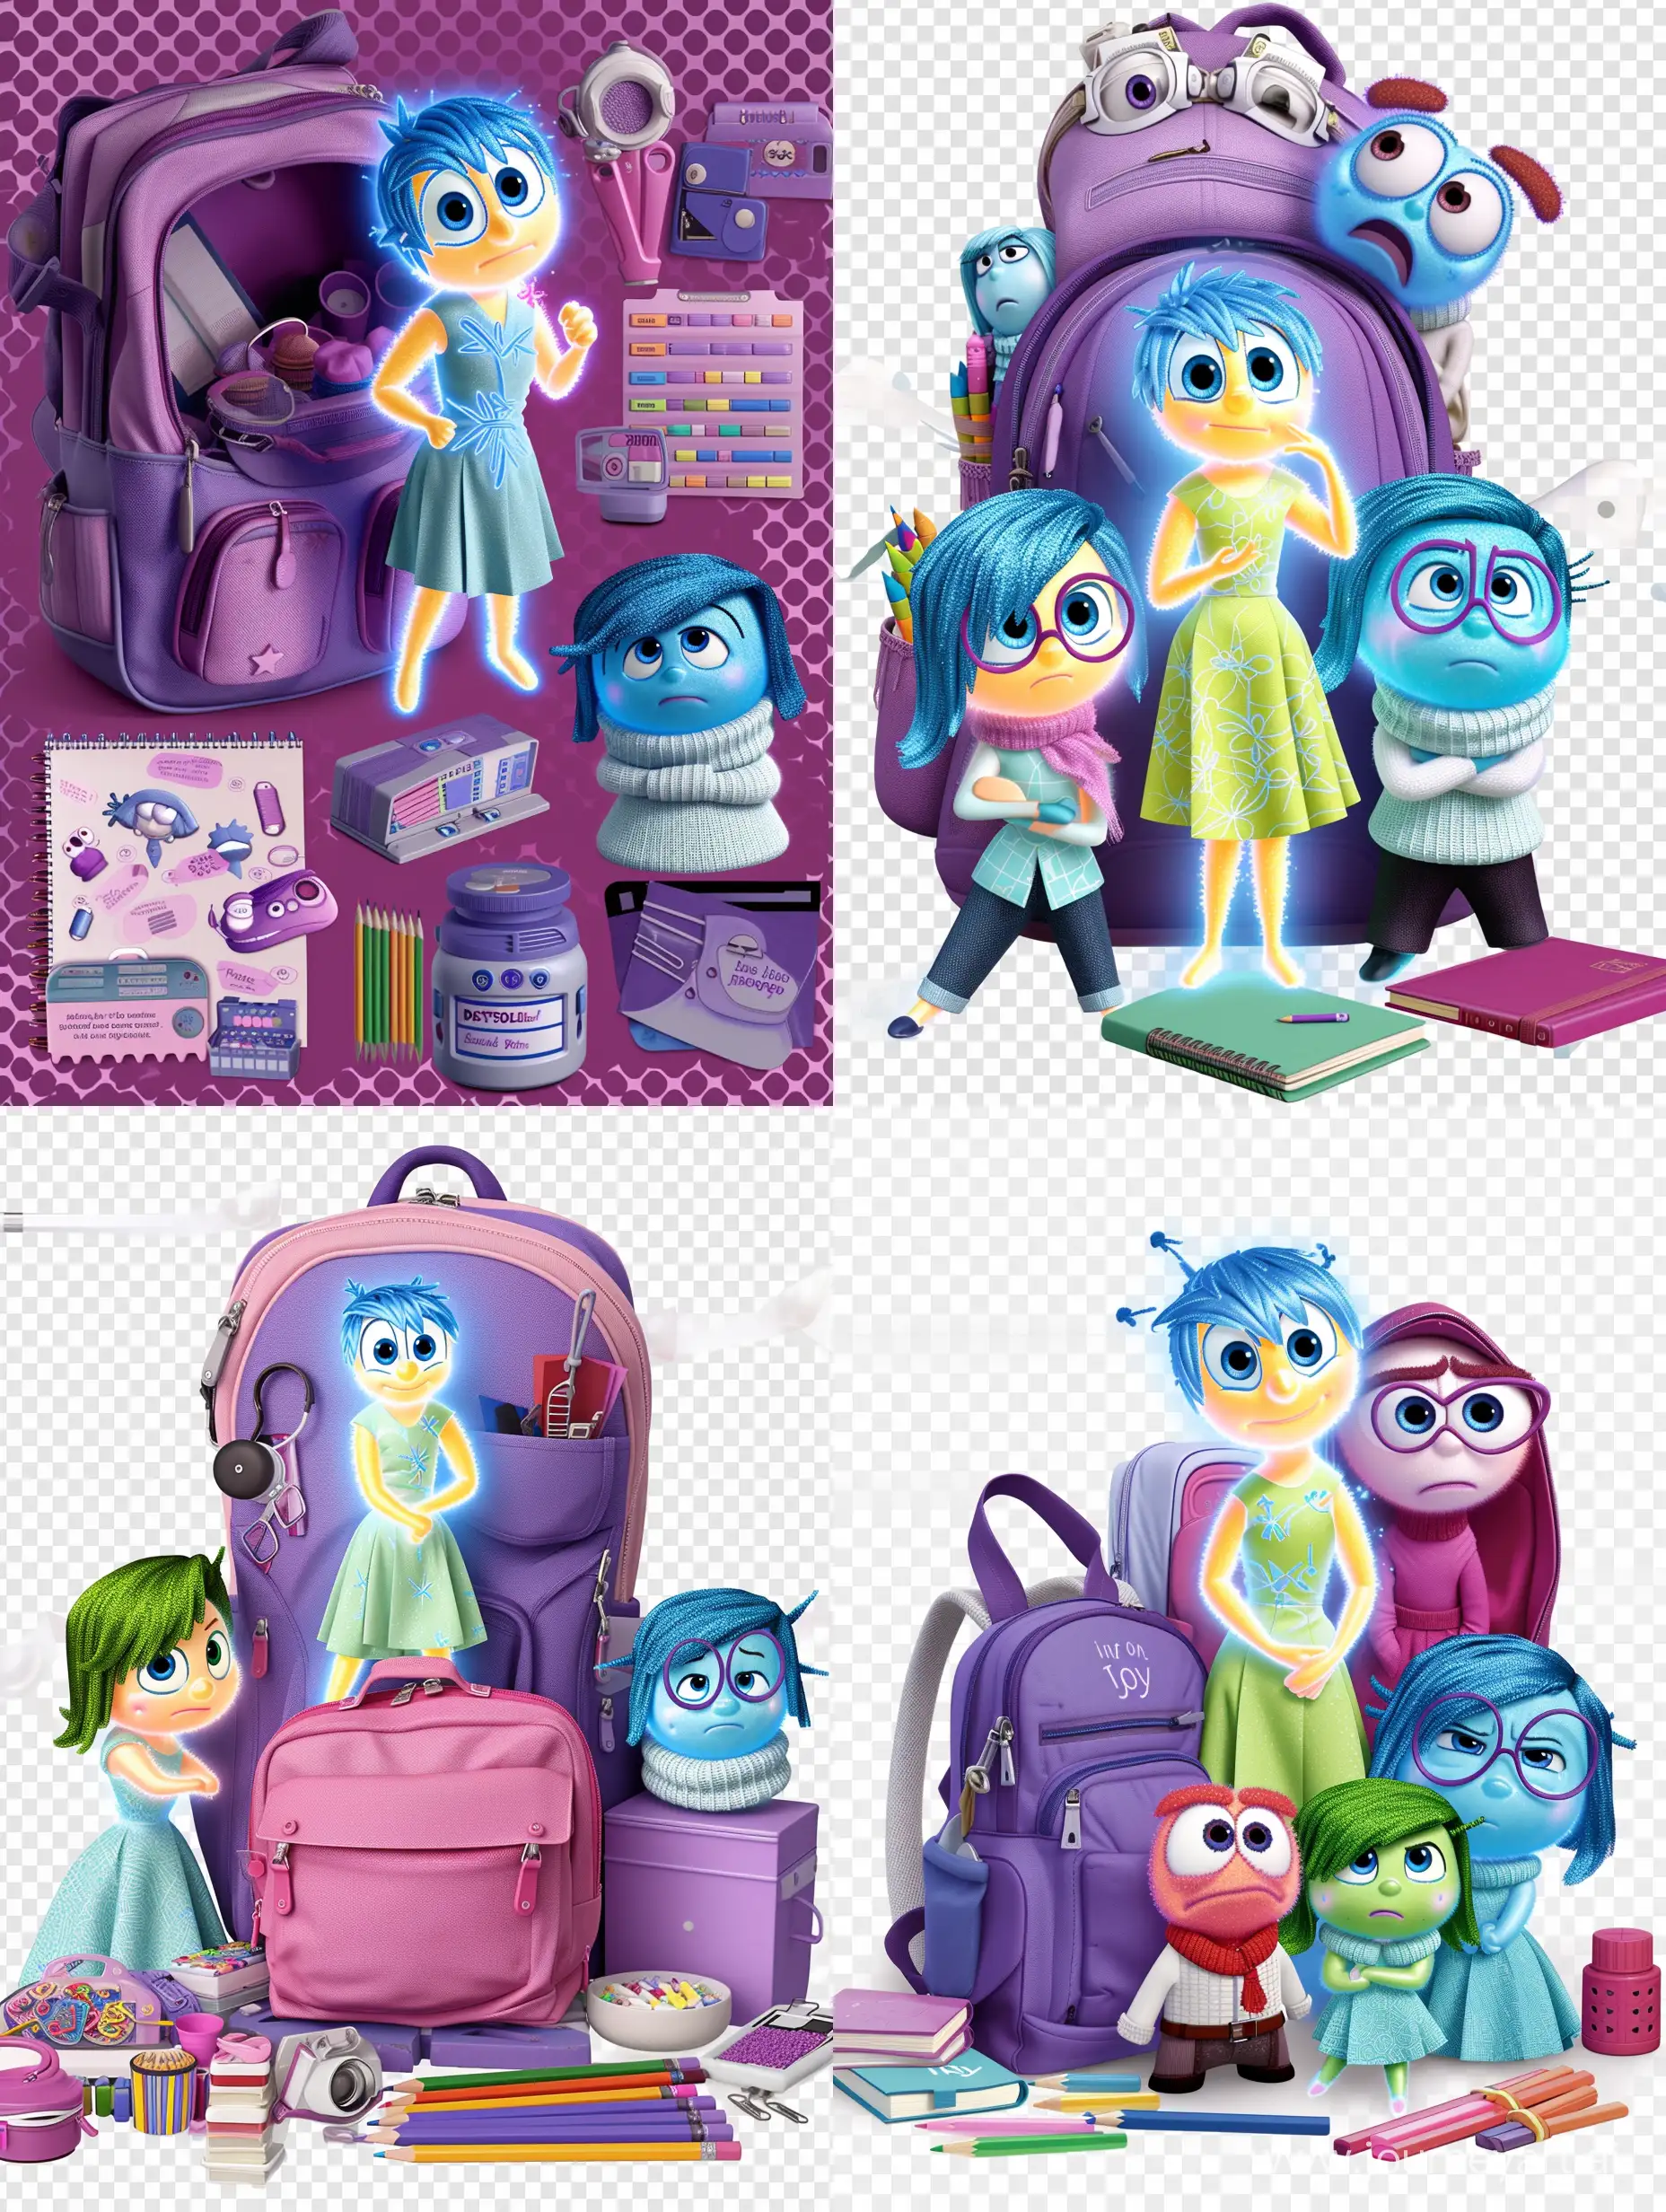 I would like to create an image with a transparent background with the characters Joy, Sadness, Fear, Disgust, and Anger from the film Inside Out with the back-to-school theme for me to apply to a girl's materials, so it must also contain the colors purple, pink in school materials such as backpacks, pencils, notebooks.
I also want it to not crop the image, all objects and characters have to be centered, without cropping them.